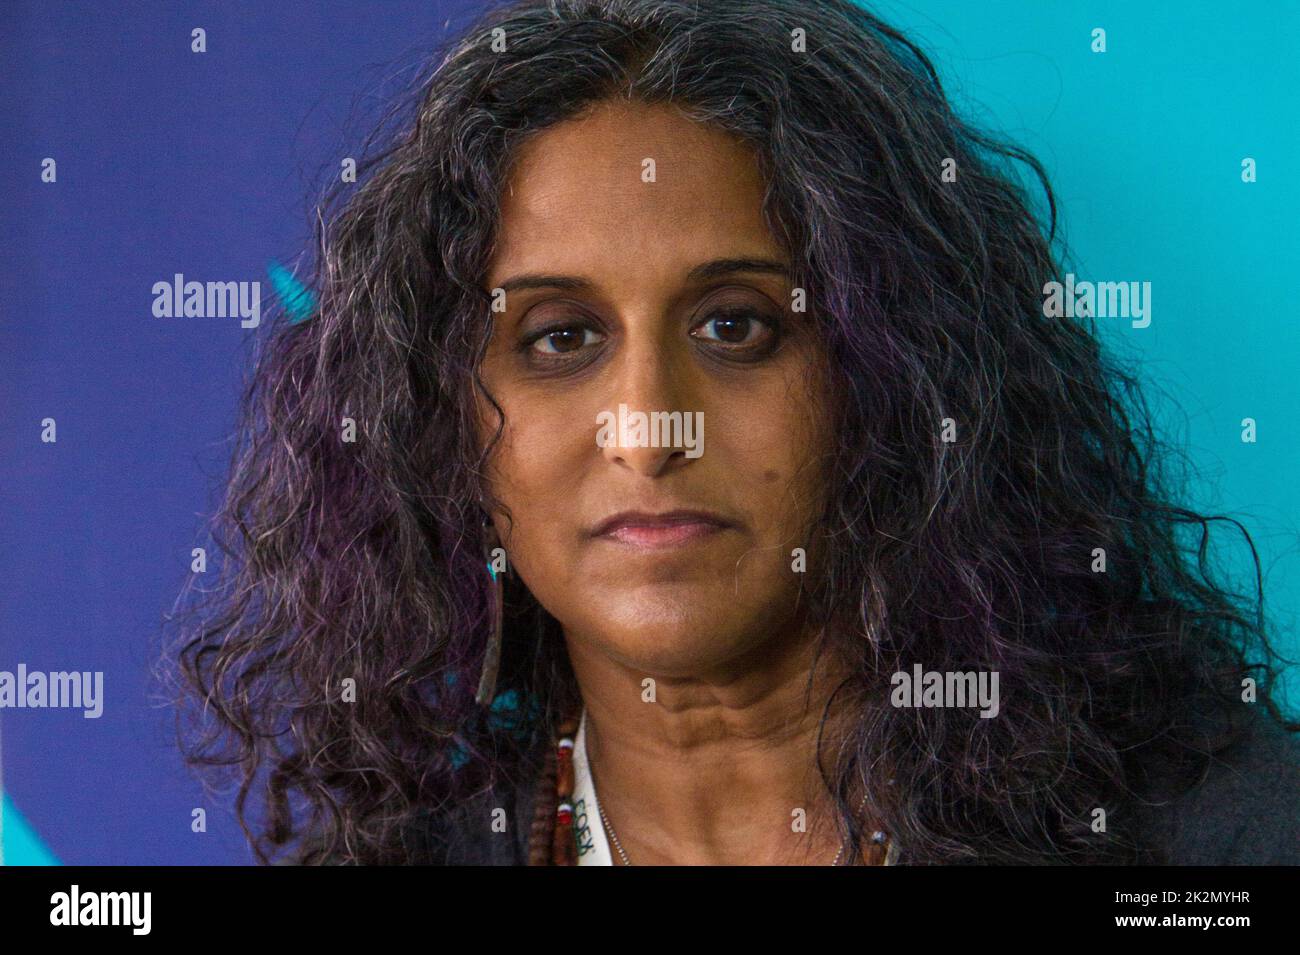 Torino, Italy. 22nd September 2022. Rupa Marya, doctor at the University of California and promoter of deep medicine, attends a conference at 2022 Terra Madre Salone del Gusto event. Stock Photo